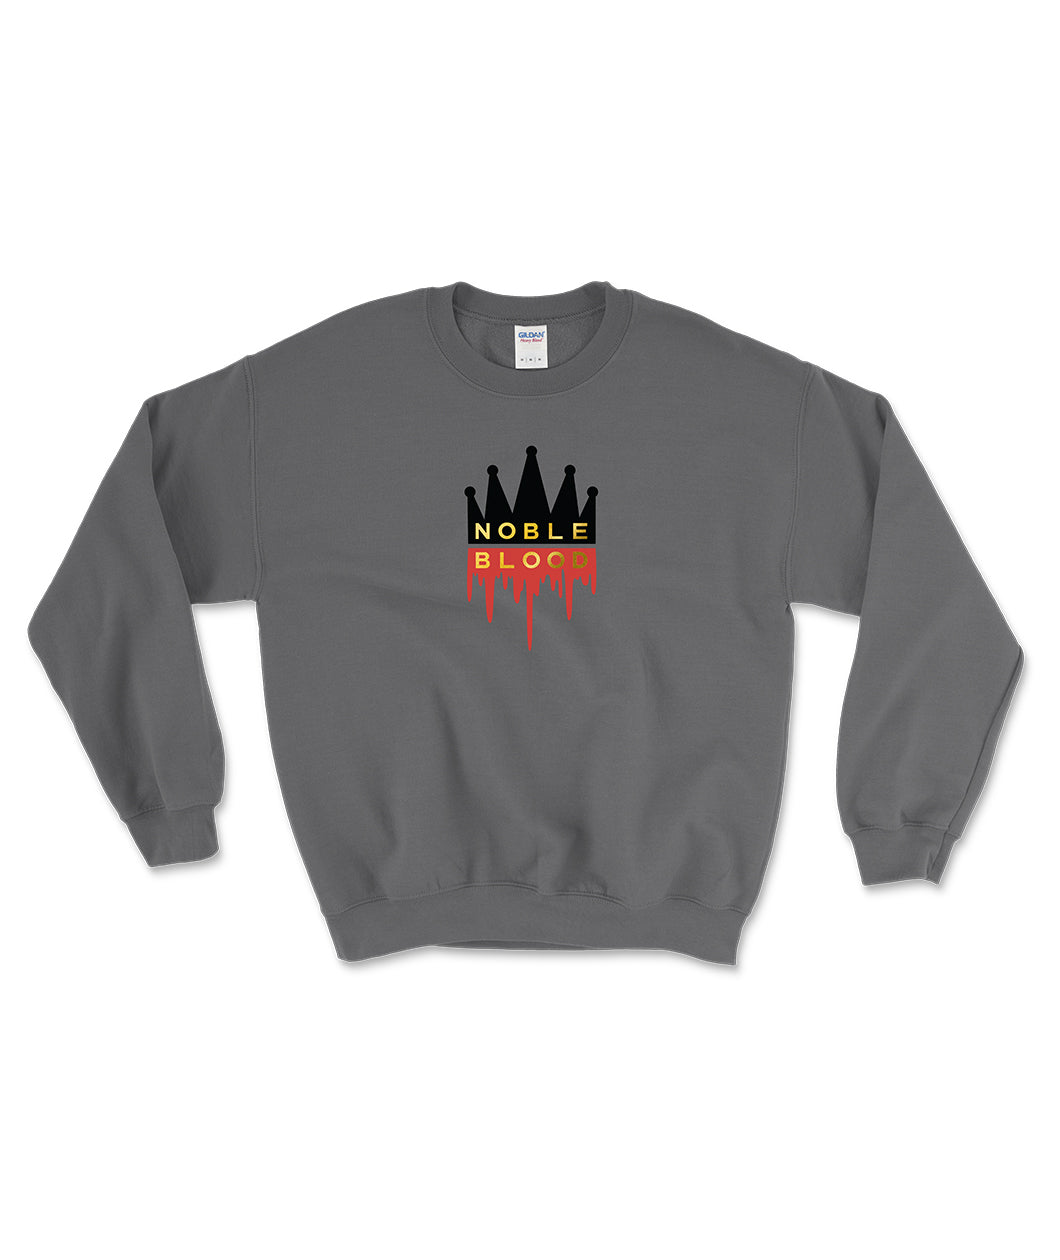 A grey crewneck with the Noble Blood logo in the front; A black crown with the word 